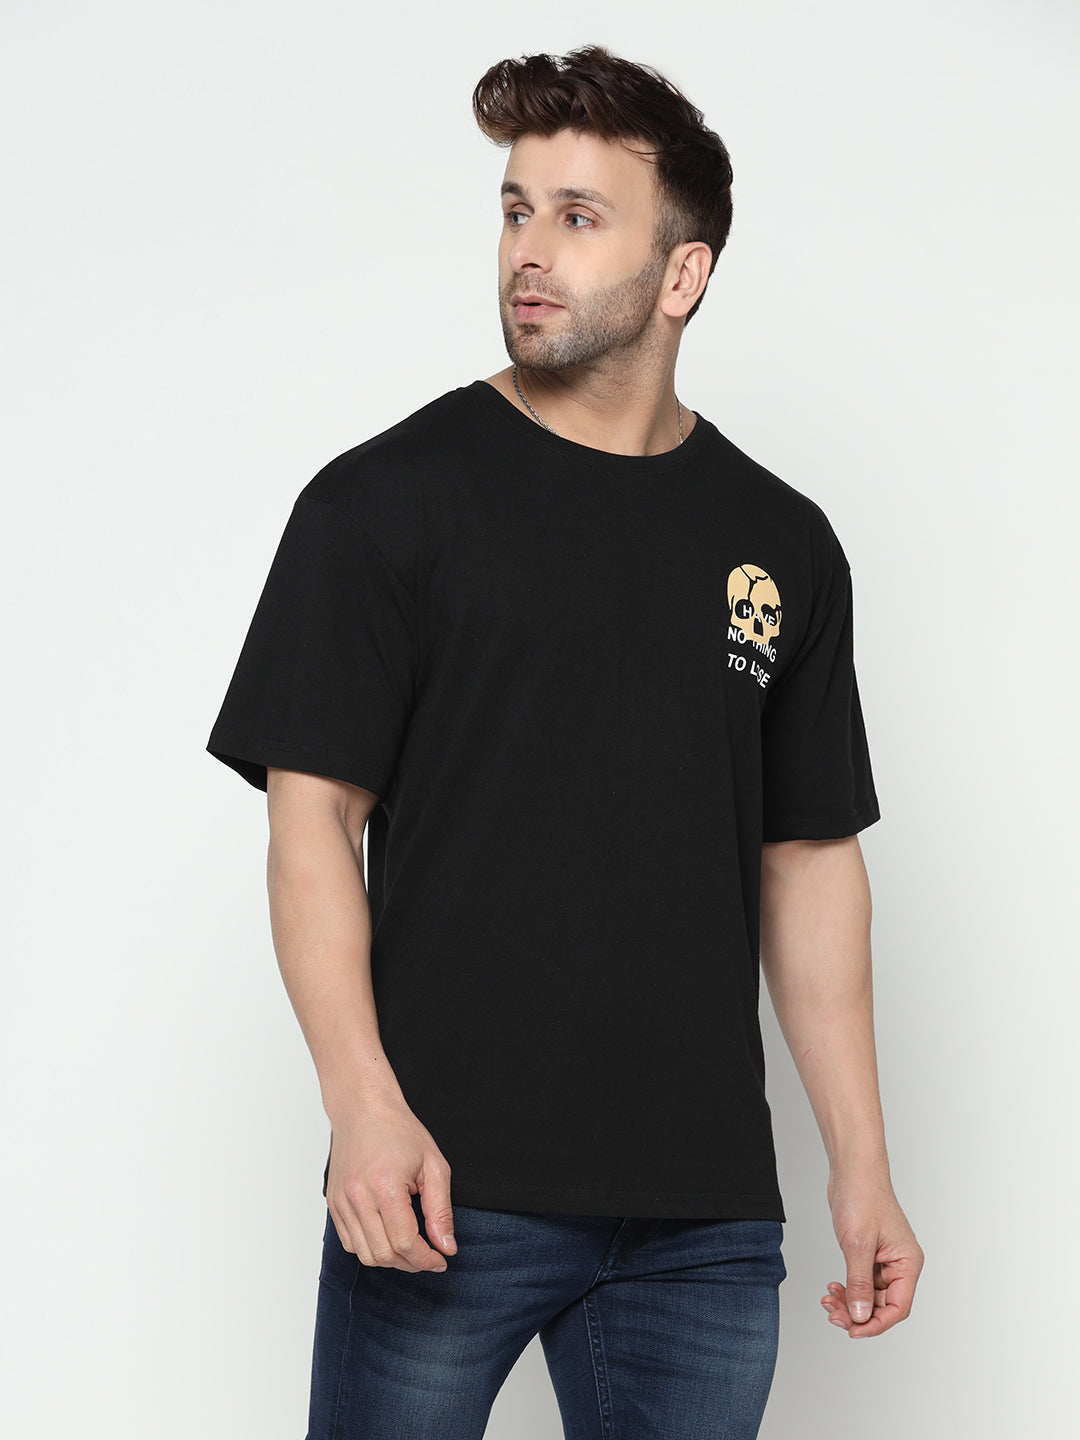 Oversized Black Half Sleeve Have Nothing to Lose Printed T-Shirt